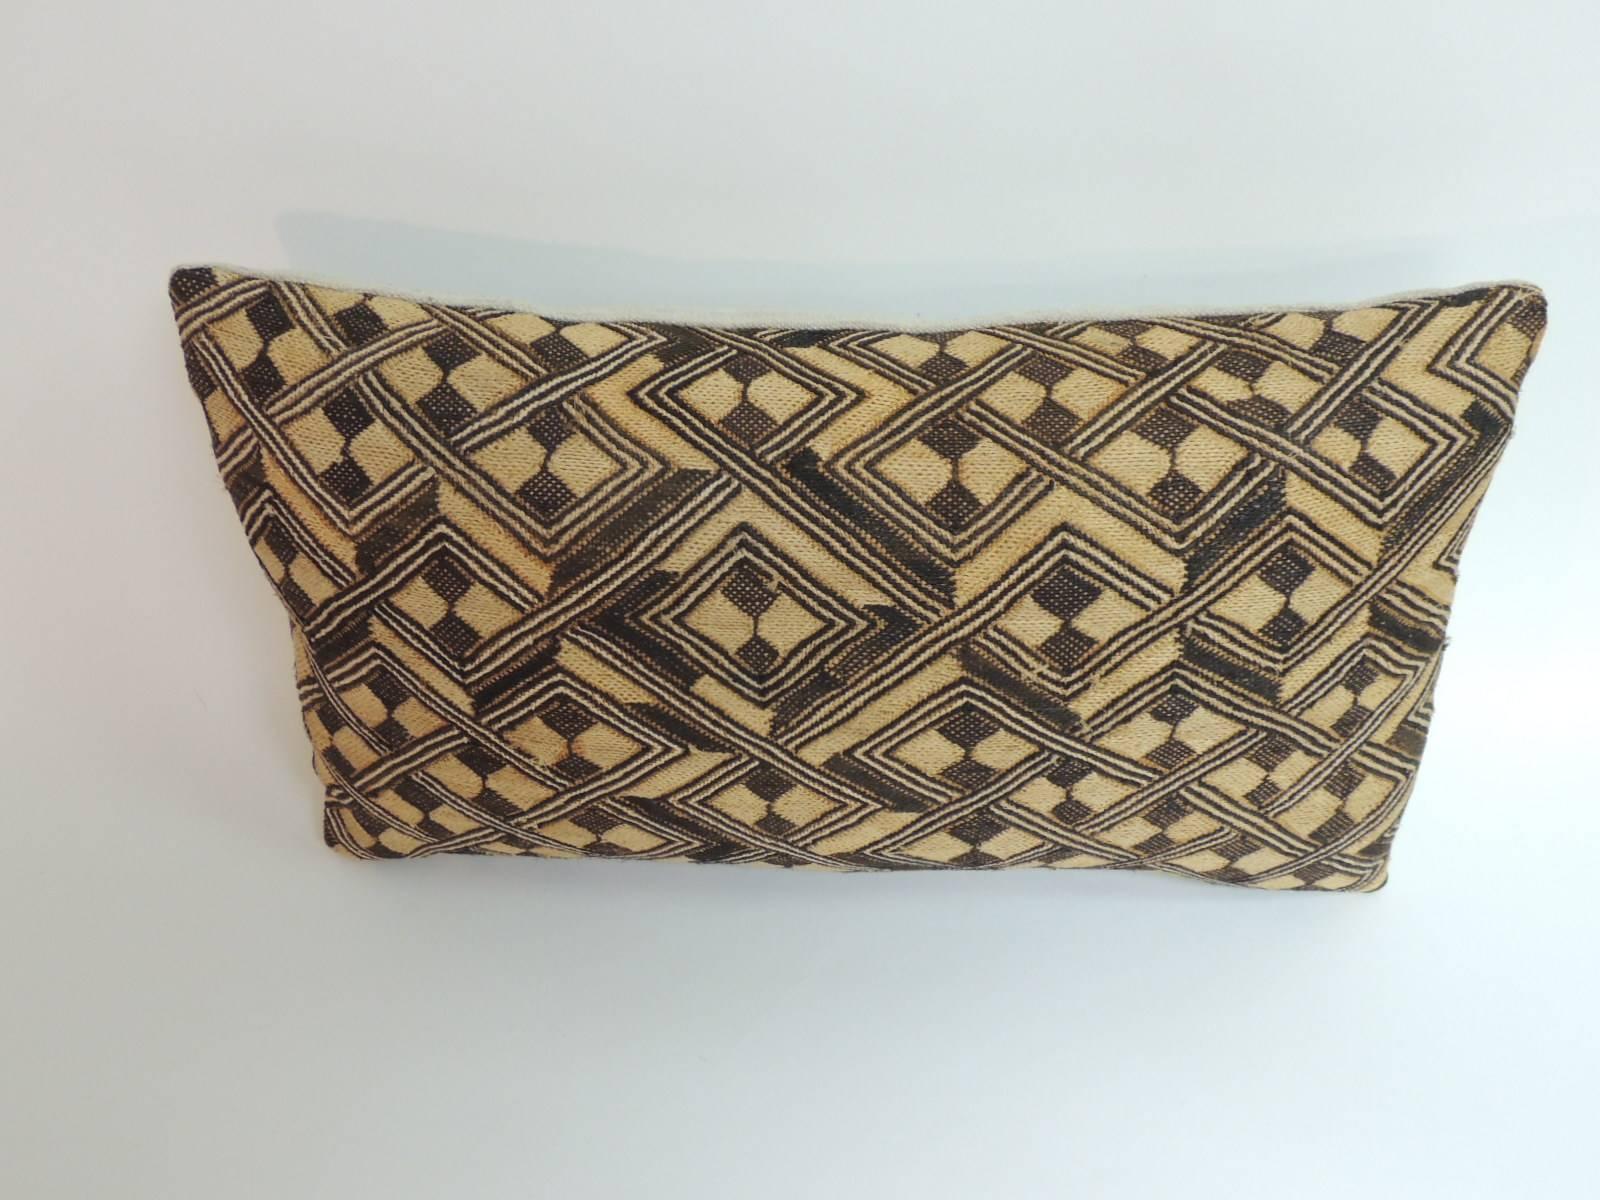 Offered by the Antique Textiles Galleries:
Vintage Handwoven orange and brown African artisanal textile decorative lumbar pillow.
Tribal woven and embroidery African lumbar pillow. Trellis and graphic diamond pattern straw cloth/raffia woven textile